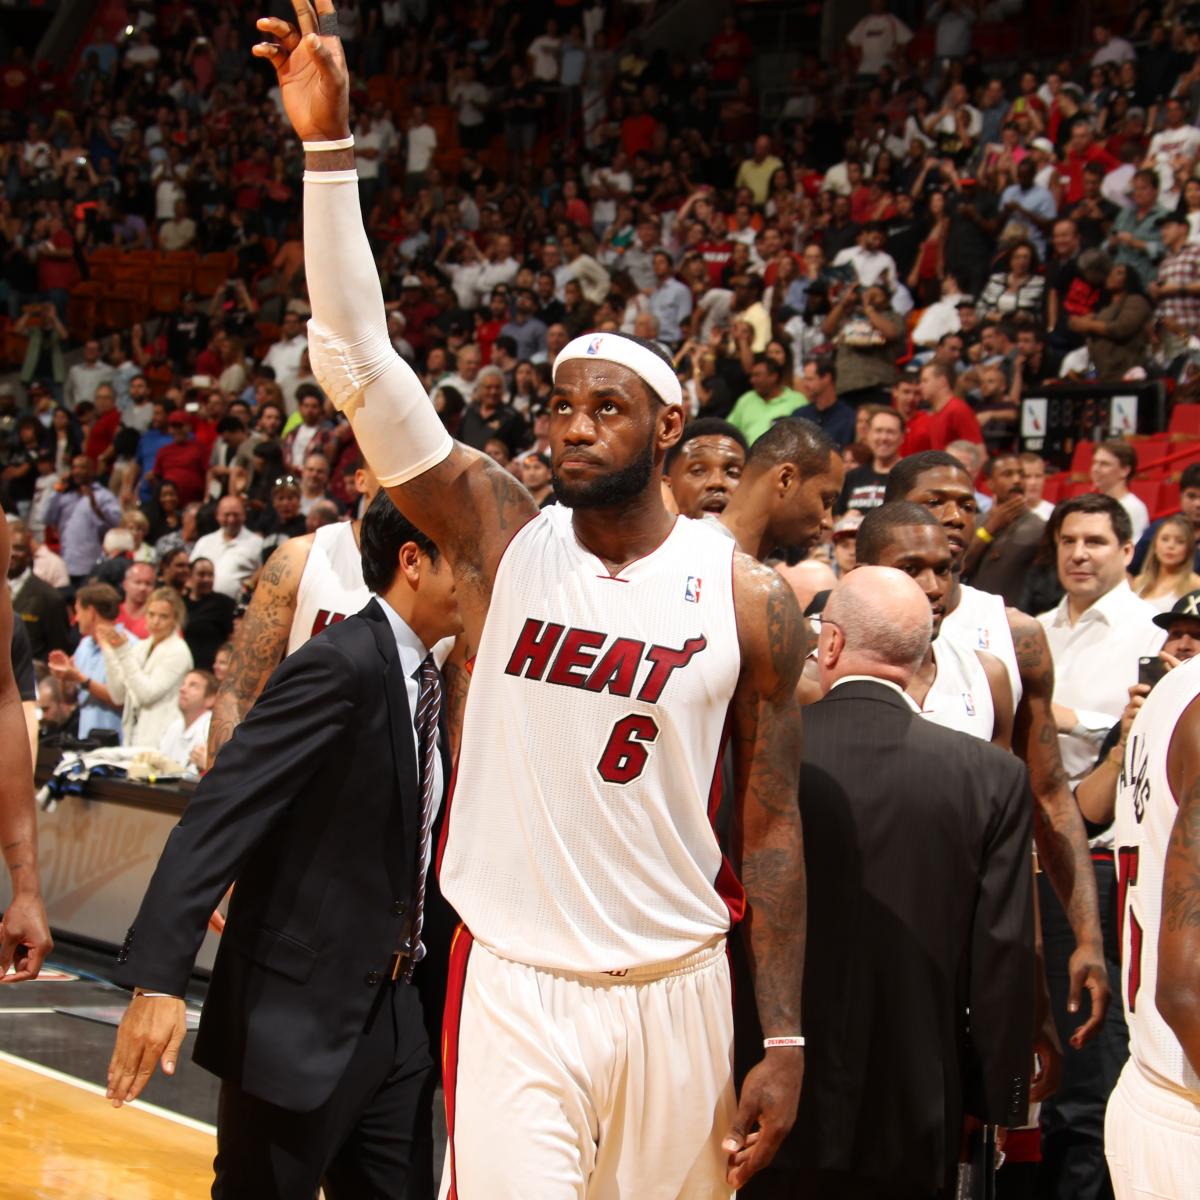 Watch Every Made Field Goal of LeBron James' CareerHigh 61 Points vs